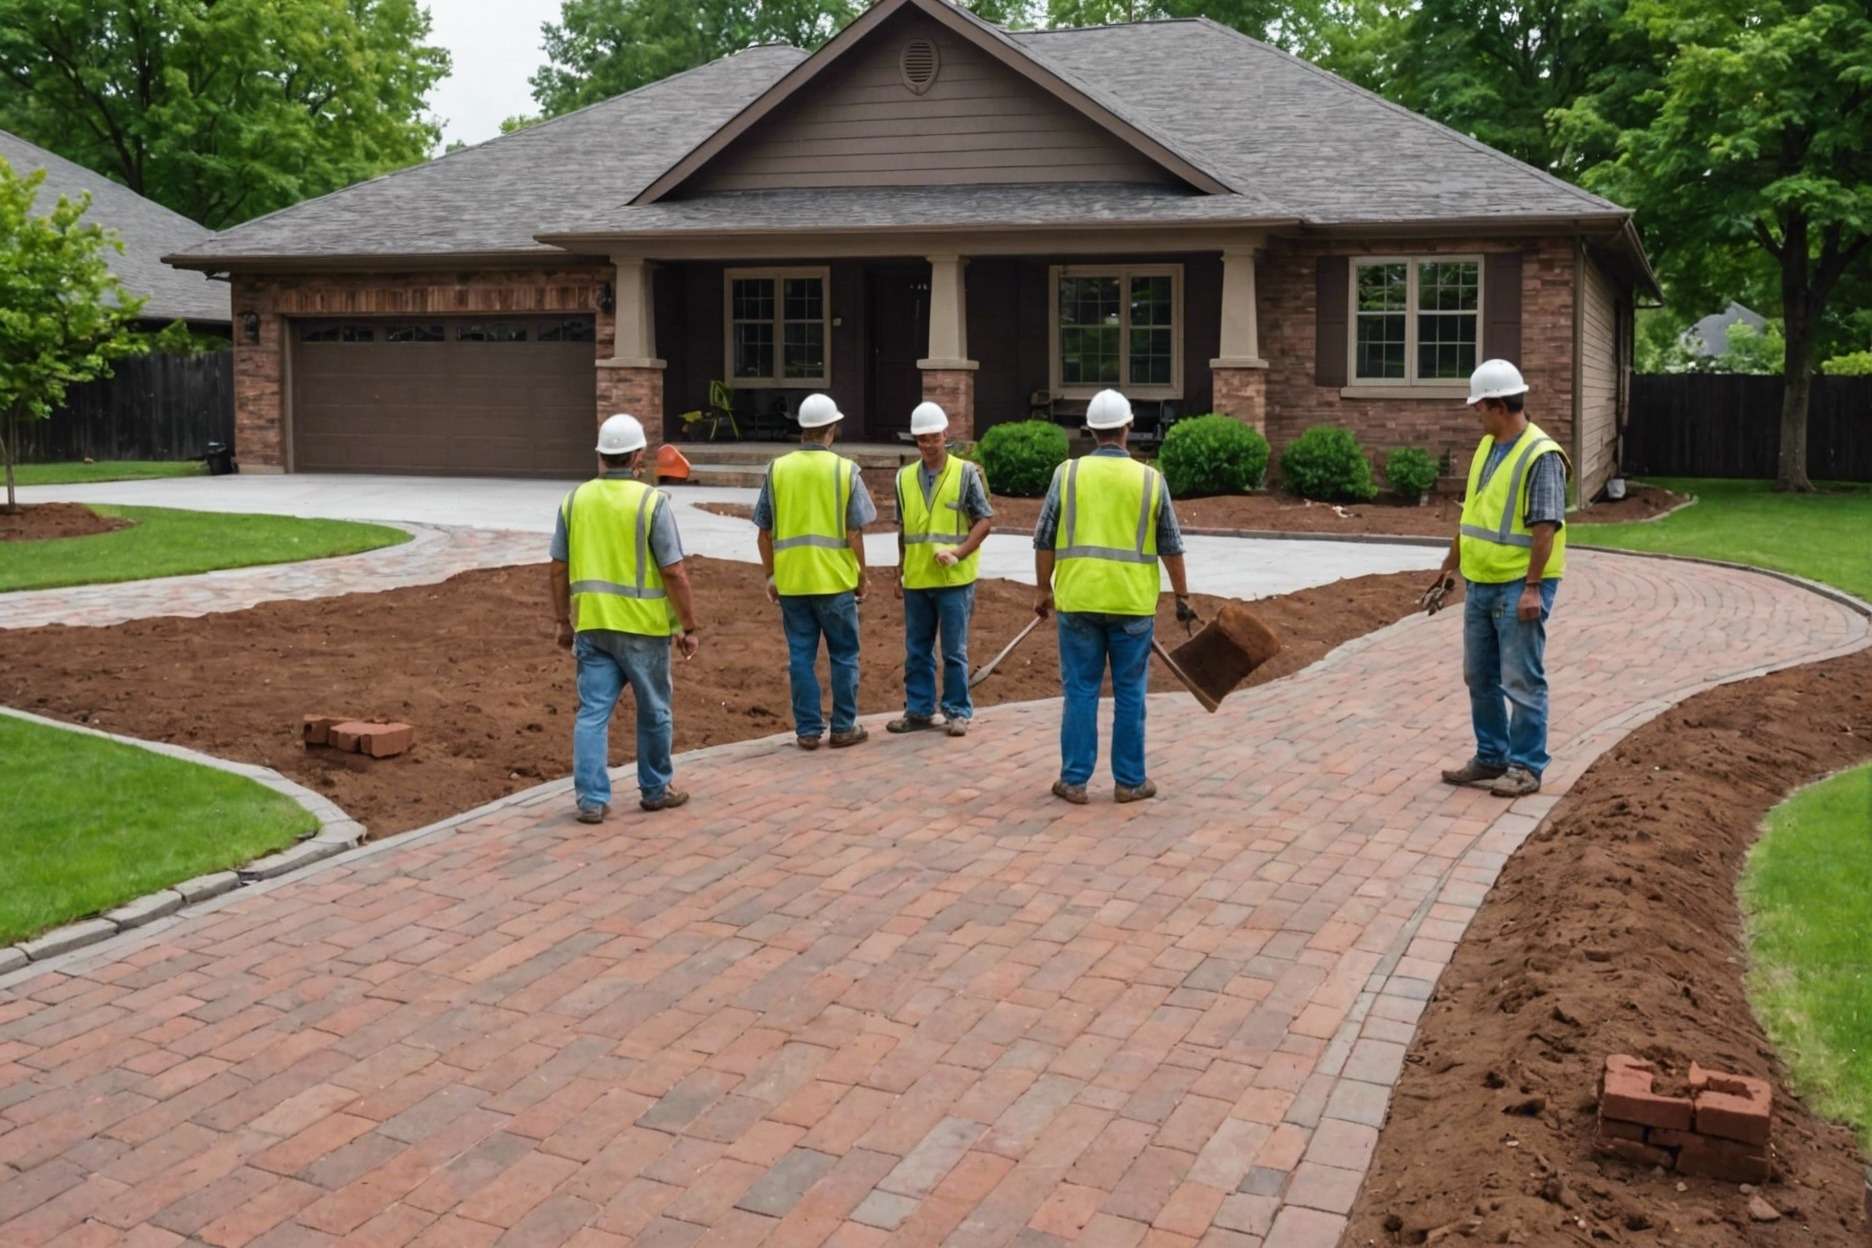 Brick driveway construction with smiling workers